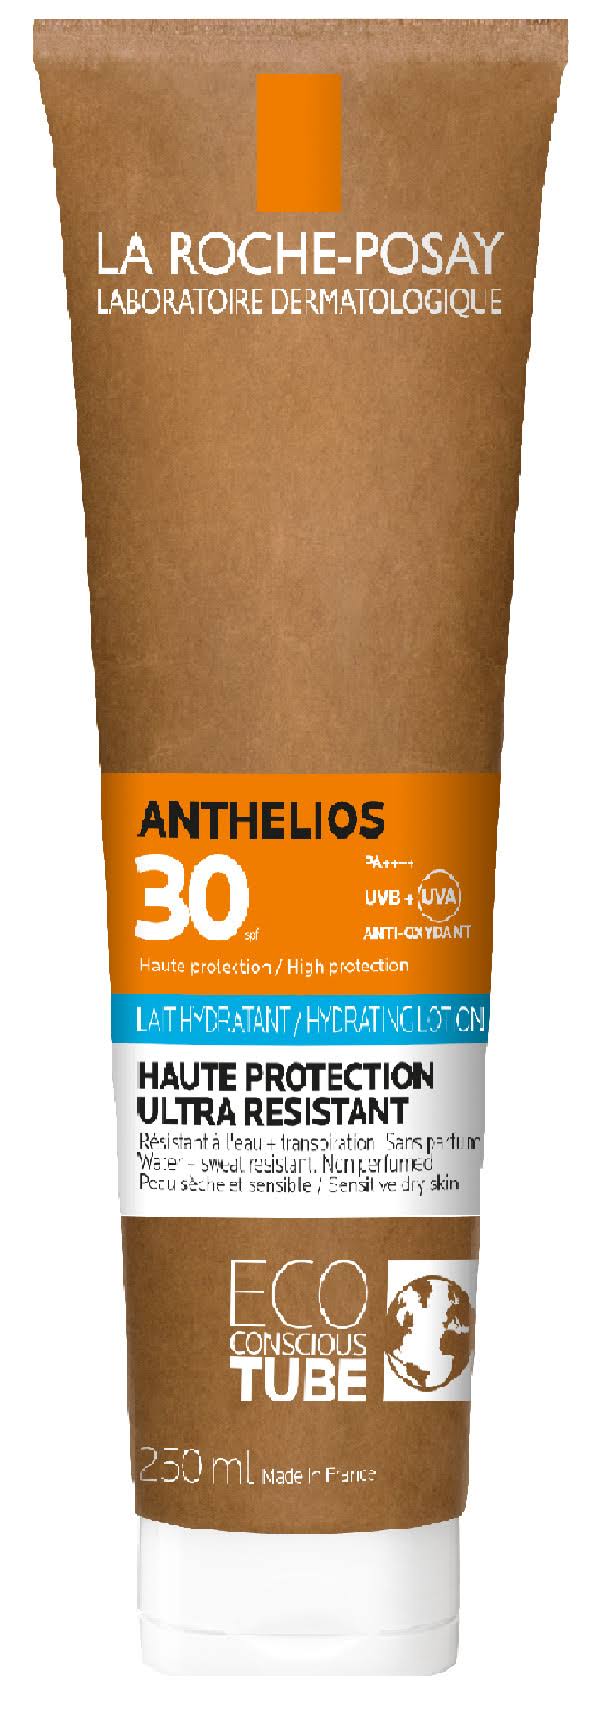 La Roche Posay - Anthelios Hydrating Lotion SPF30 250ml